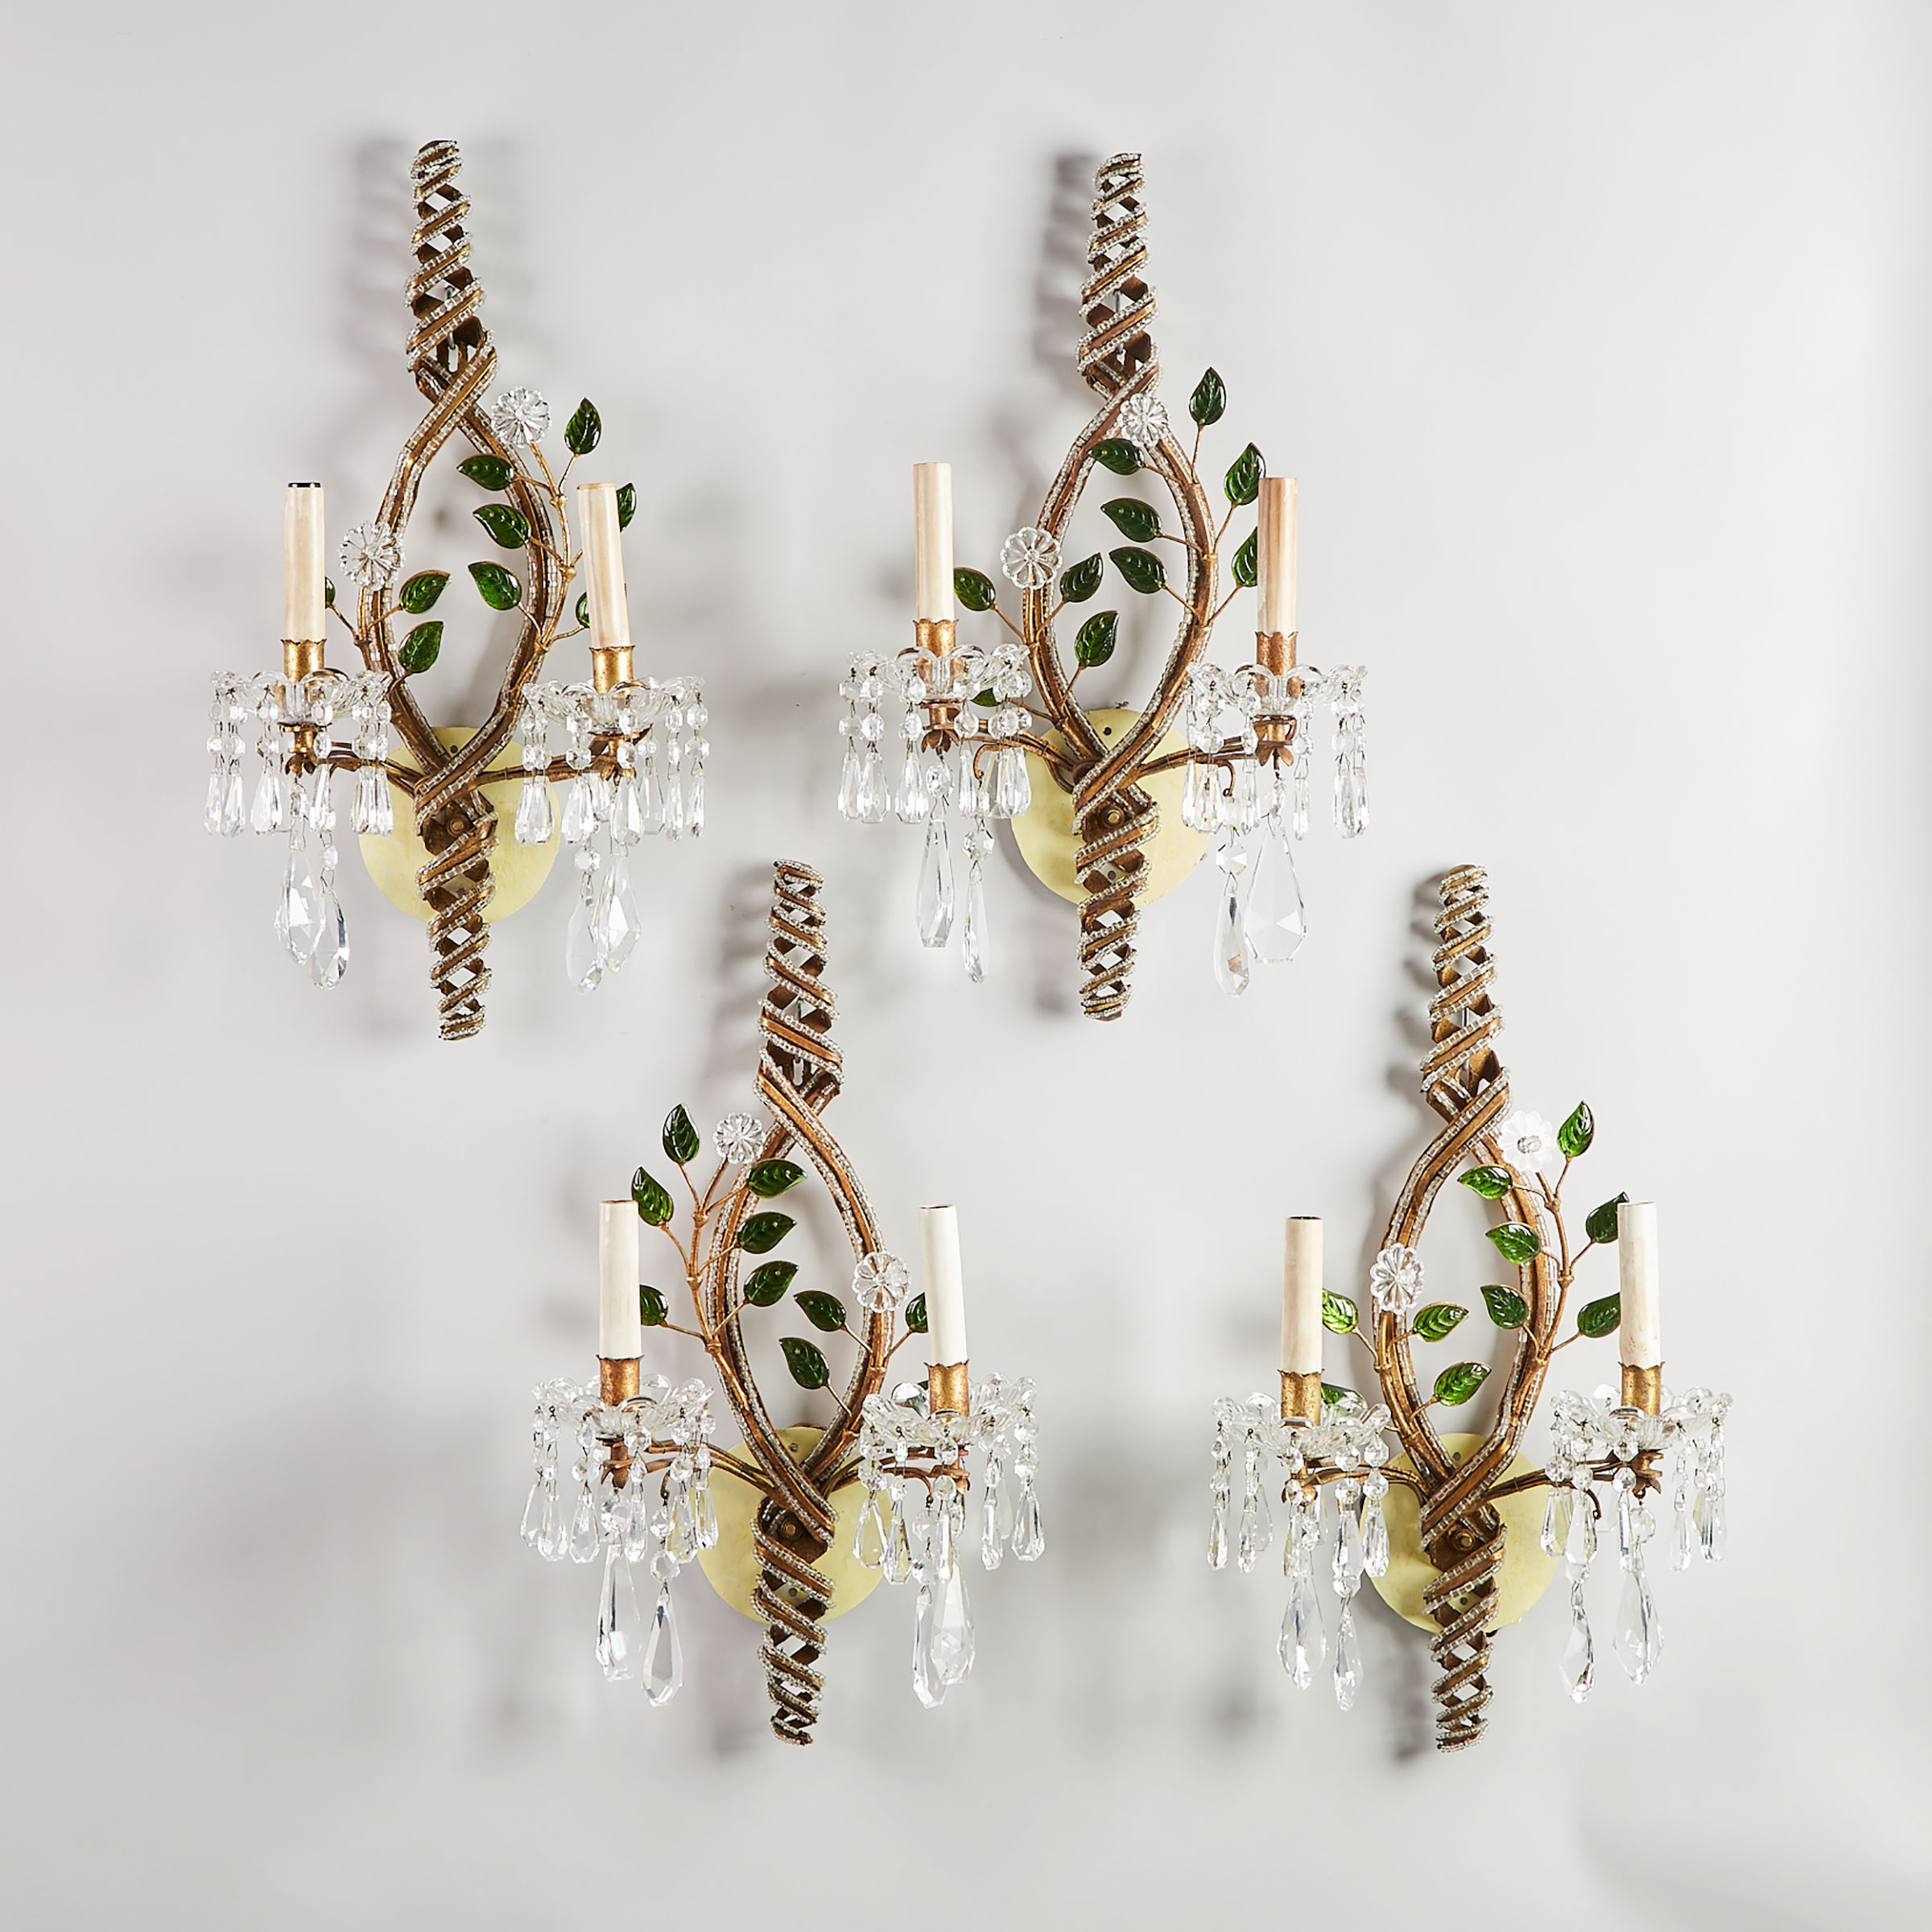 Set of Four Italian Glass and GIlt Metal Two Light Wall Sconces, early 20th century